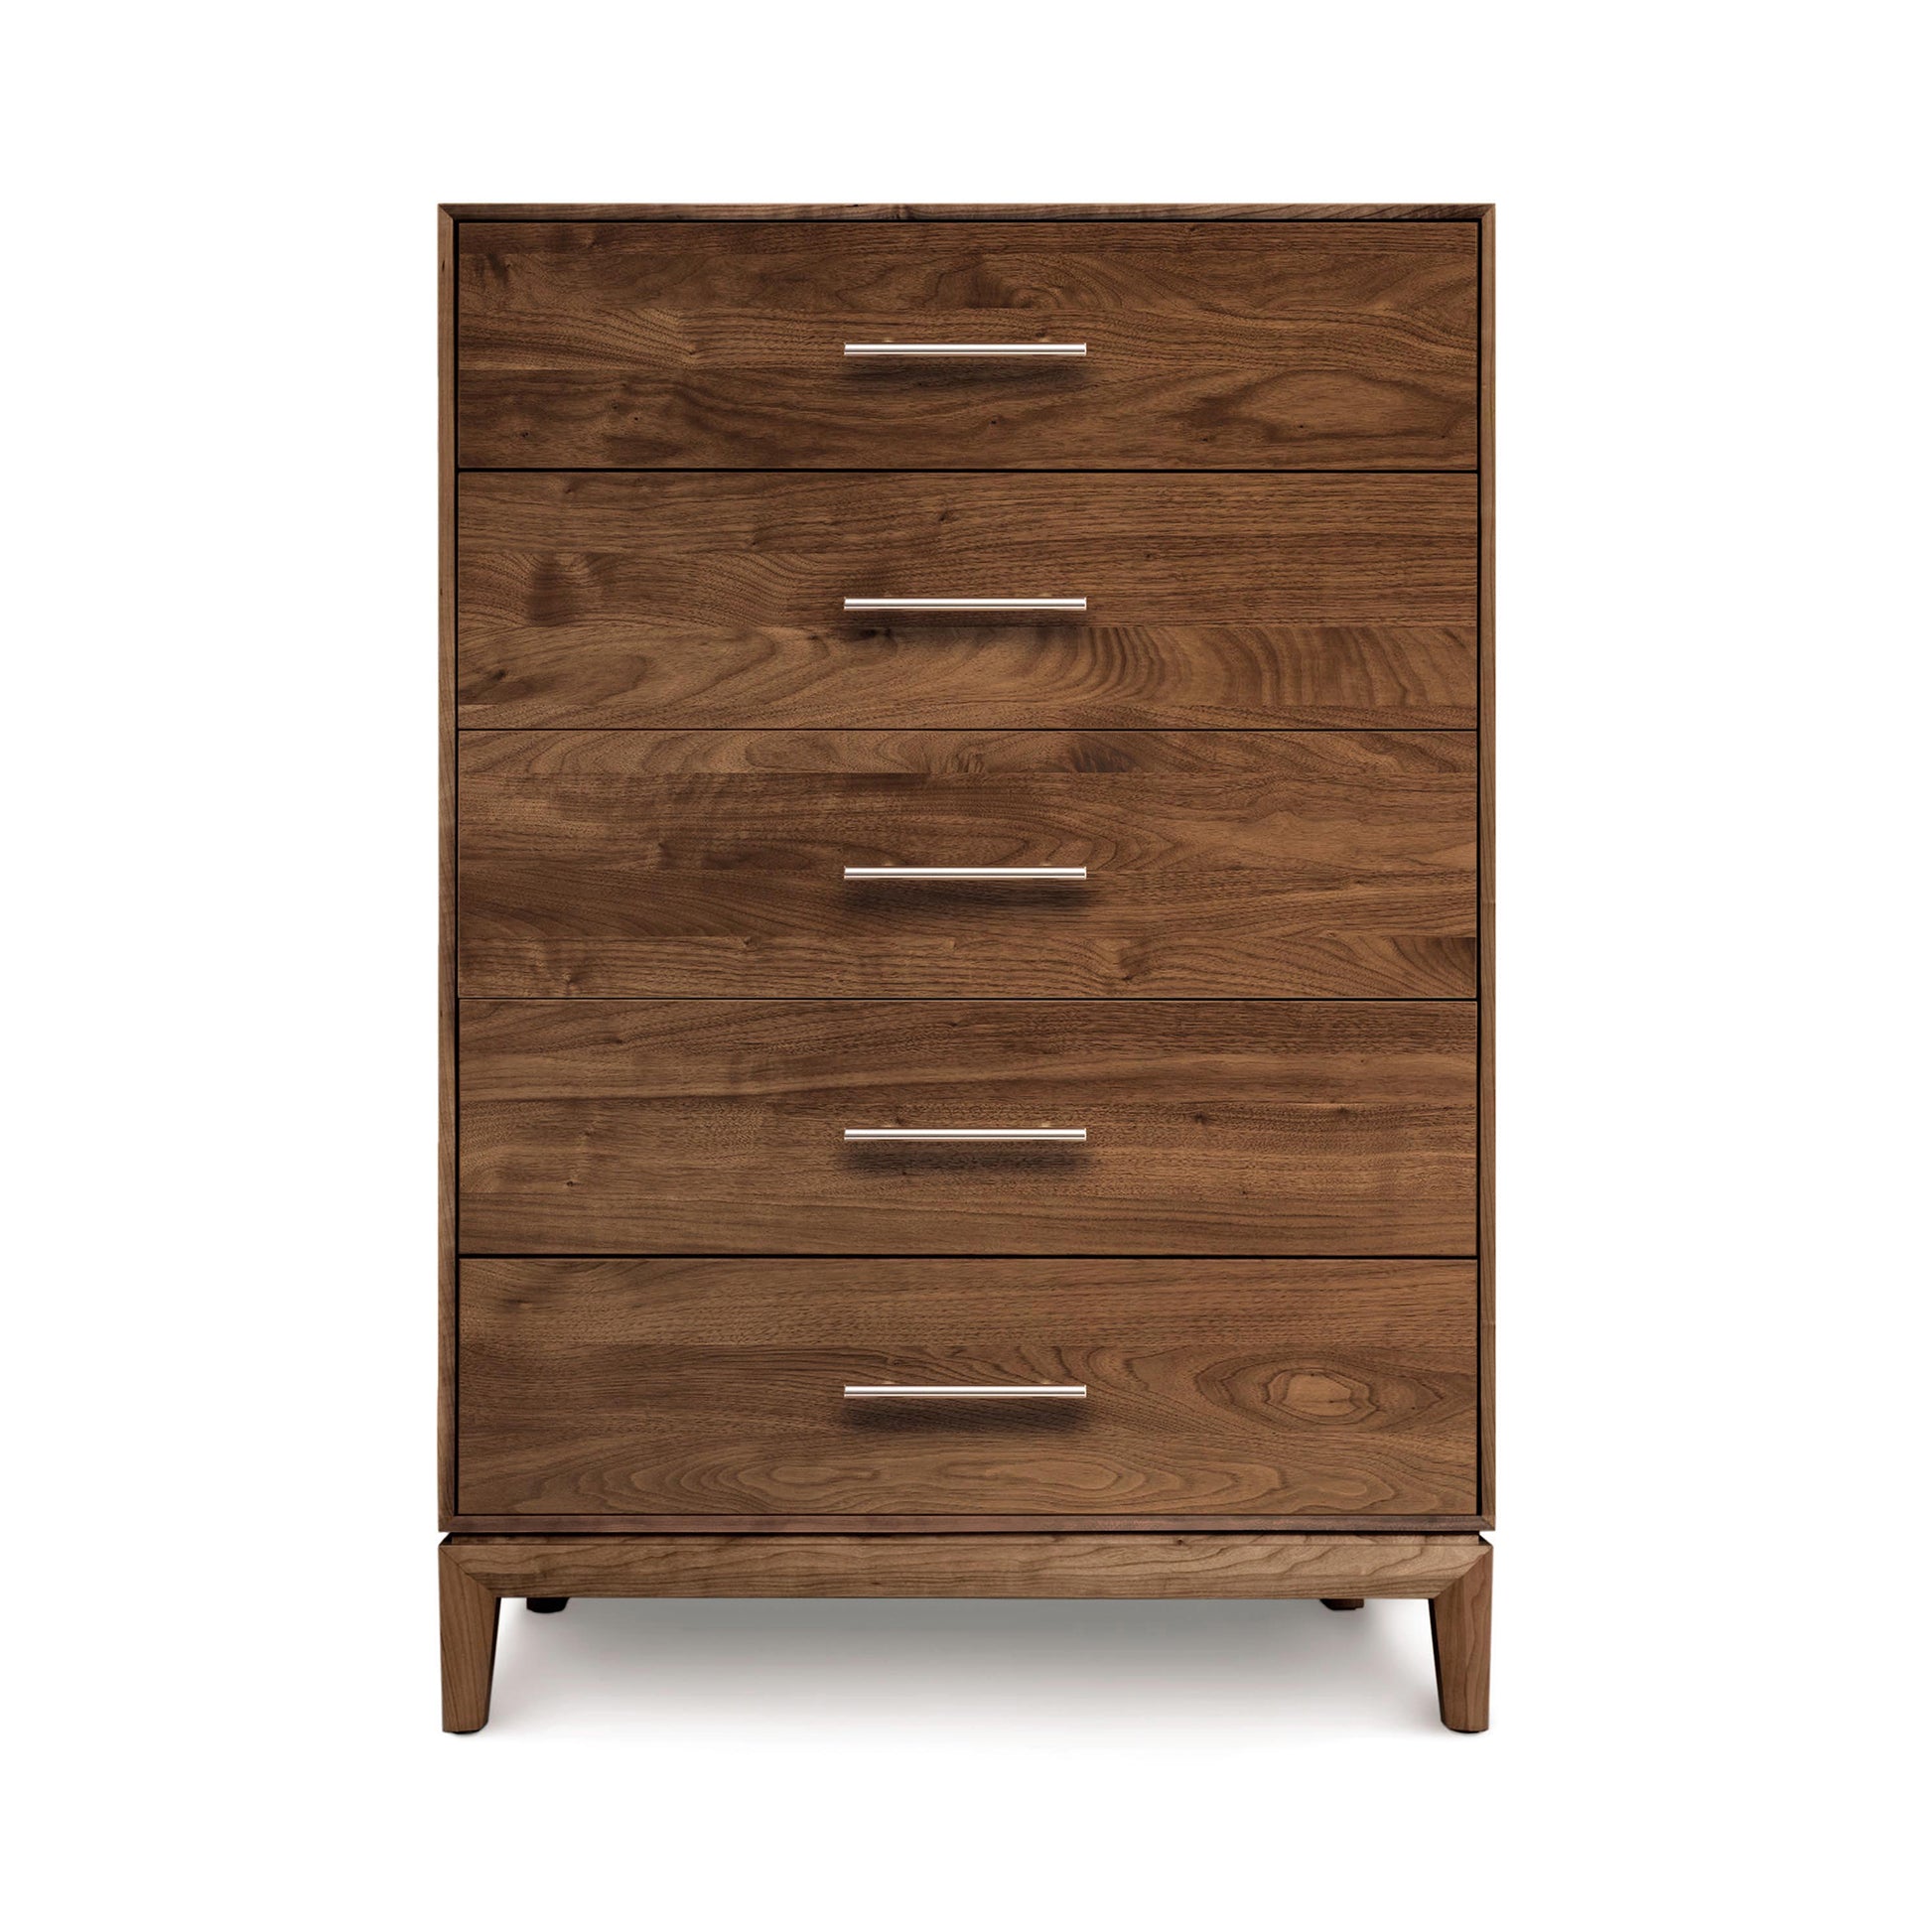 A Mansfield 5-Drawer Wide Chest - Walnut - Ready to Ship from Copeland Furniture, with four drawers, featuring a mid-century modern design.